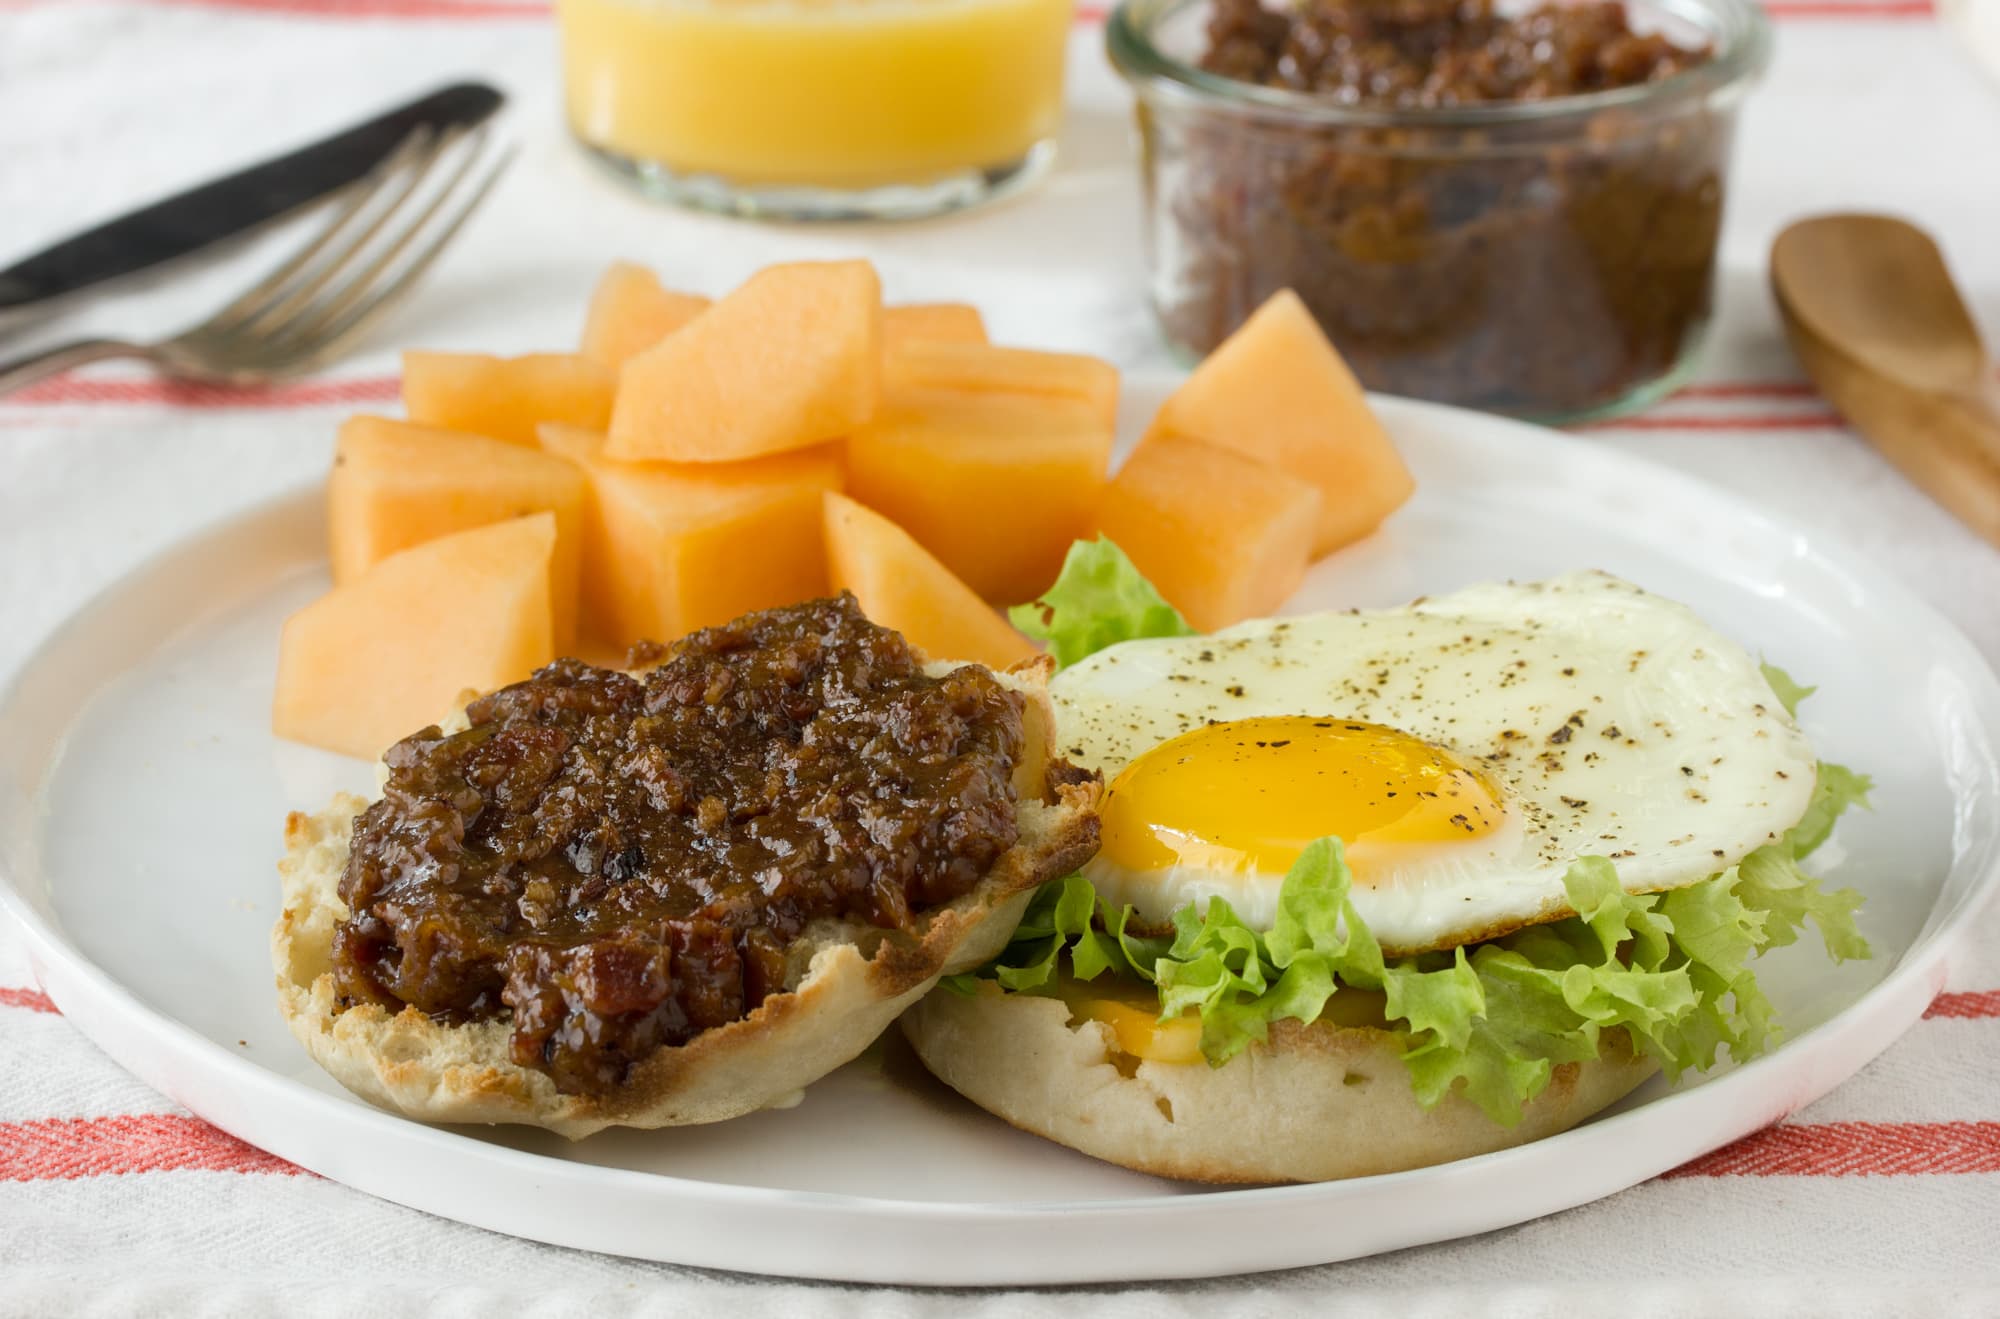 Healthy Bacon and Jam Egg Sandwiches - Sweet Savory and Steph